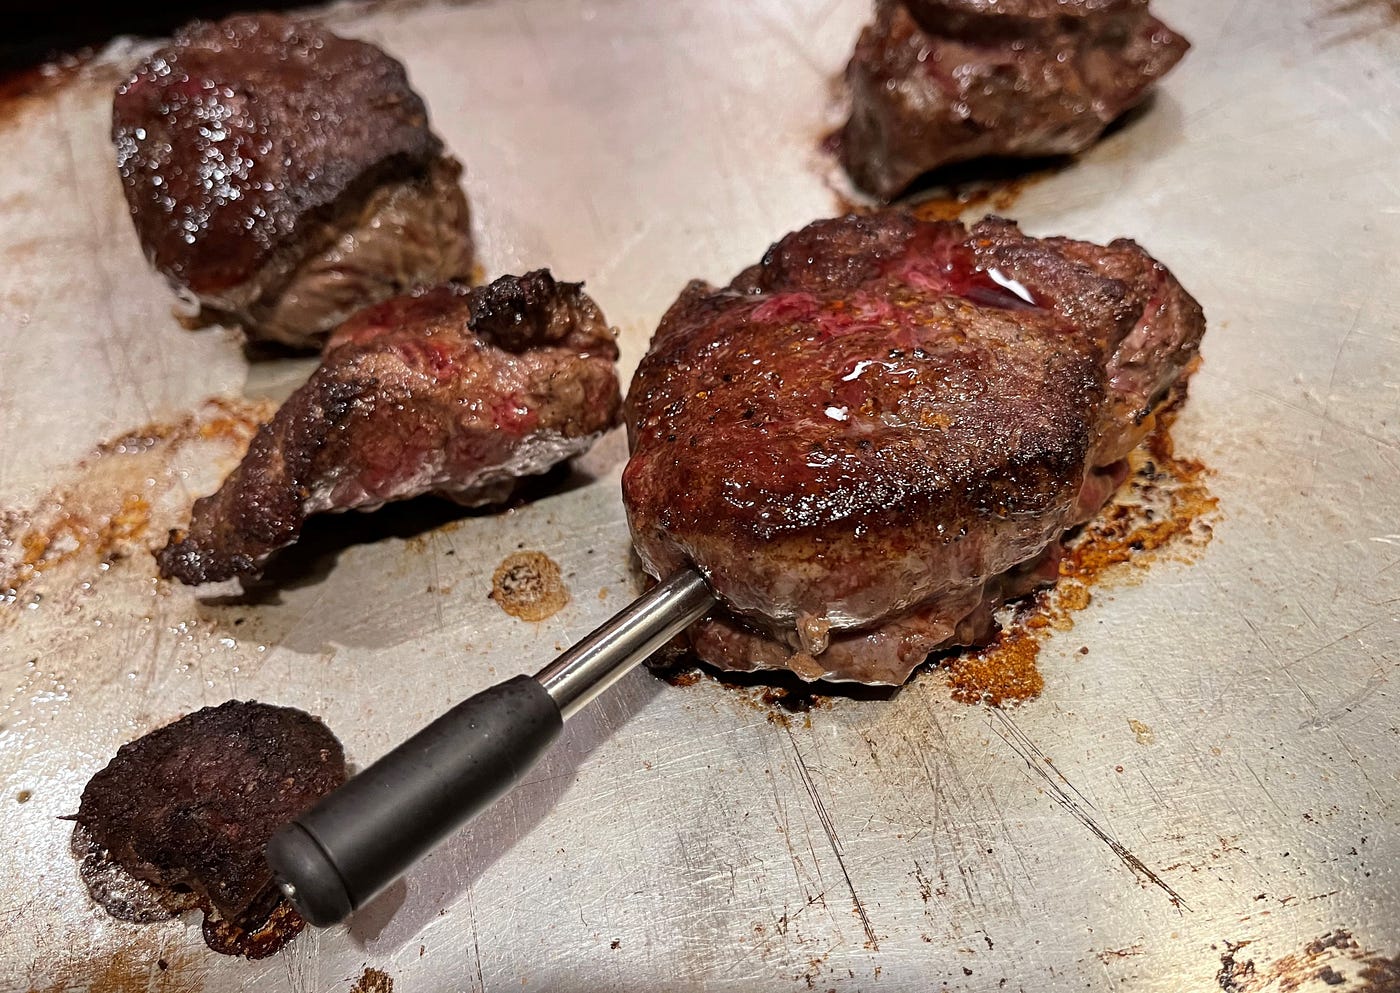 KitchenAid Yummly Smart Bluetooth Meat Thermometer in Graphite